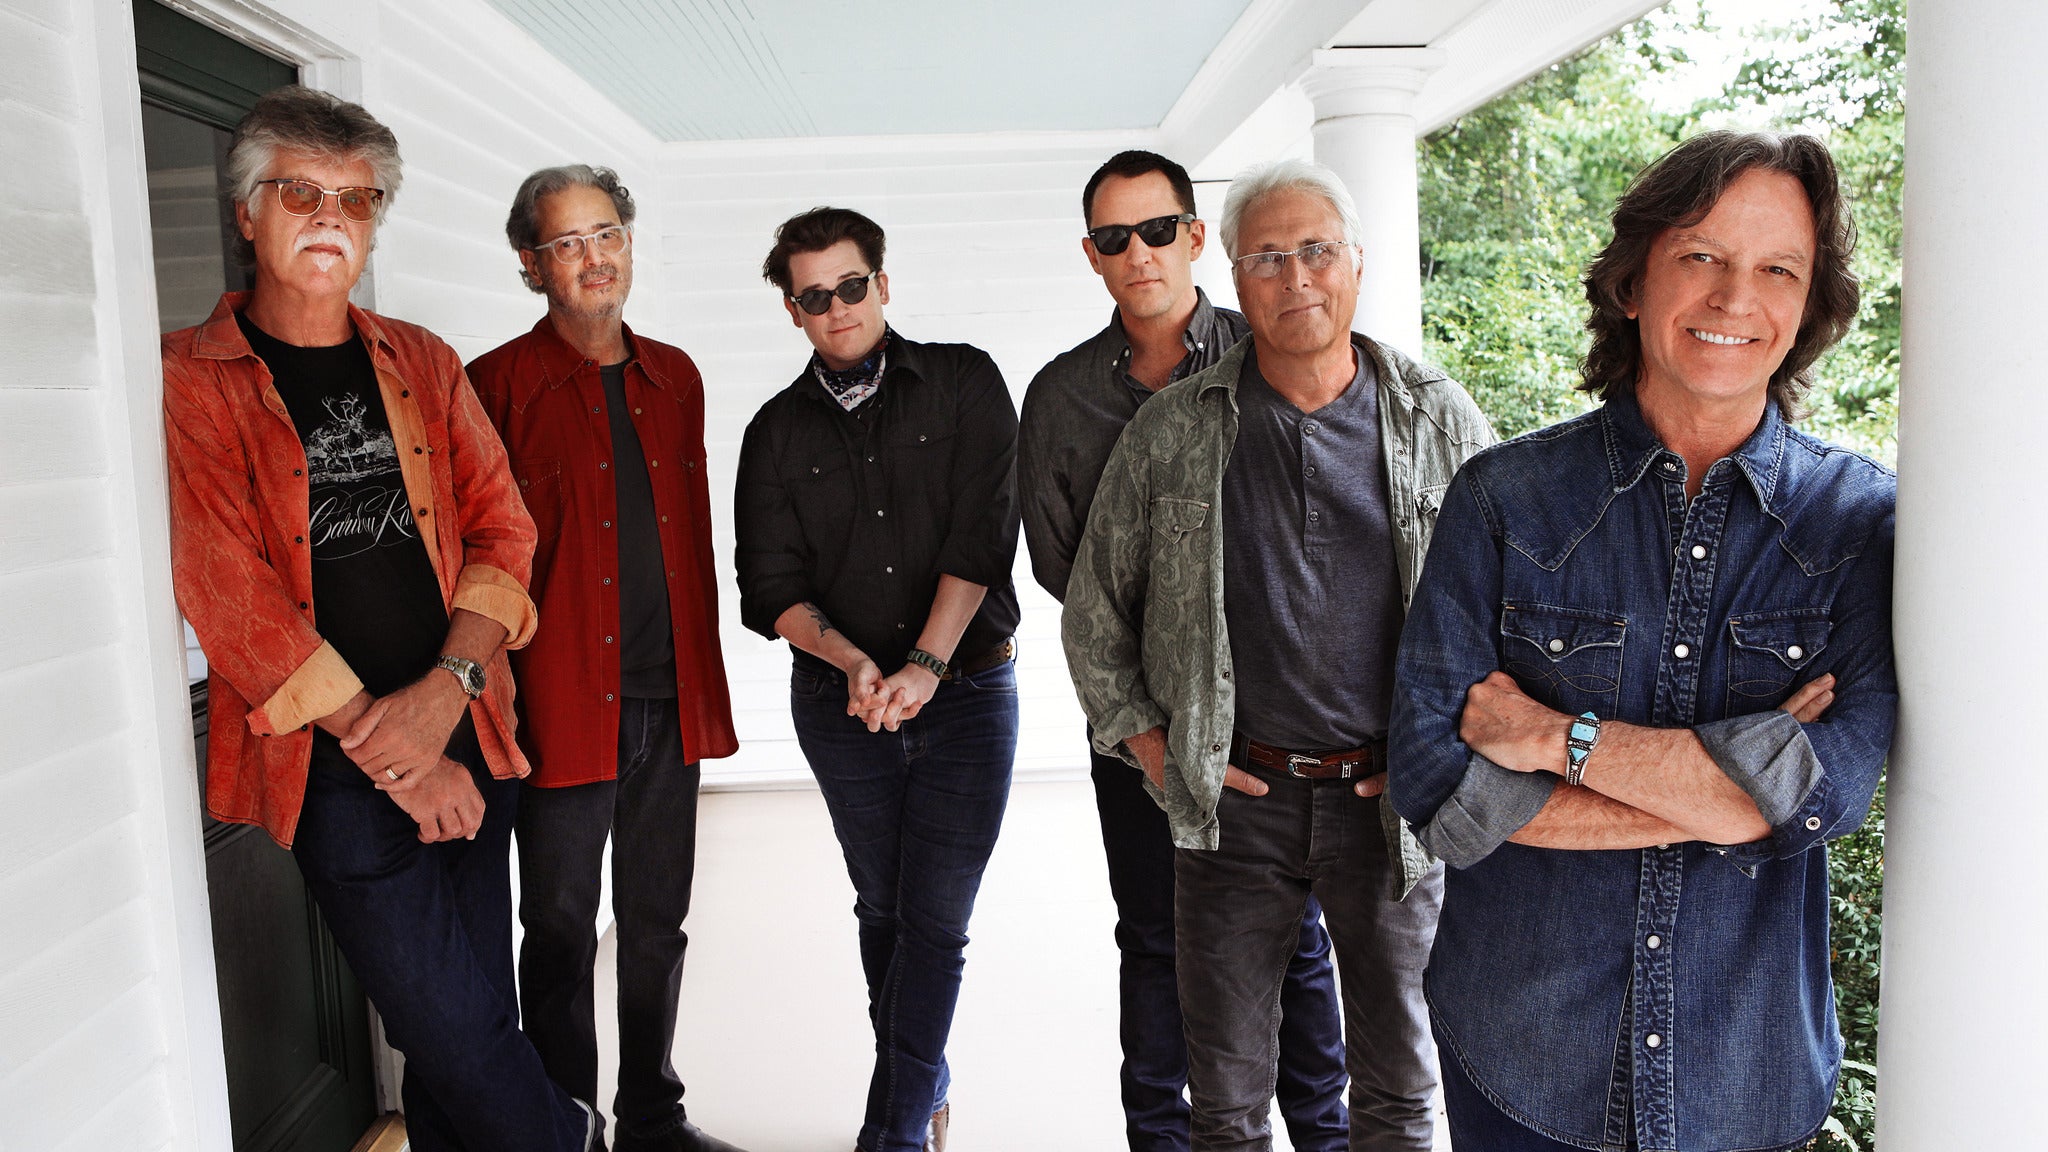 AEG & 97.3 KBCO Present Nitty Gritty Dirt Band in Denver promo photo for Promoter / Venue presale offer code